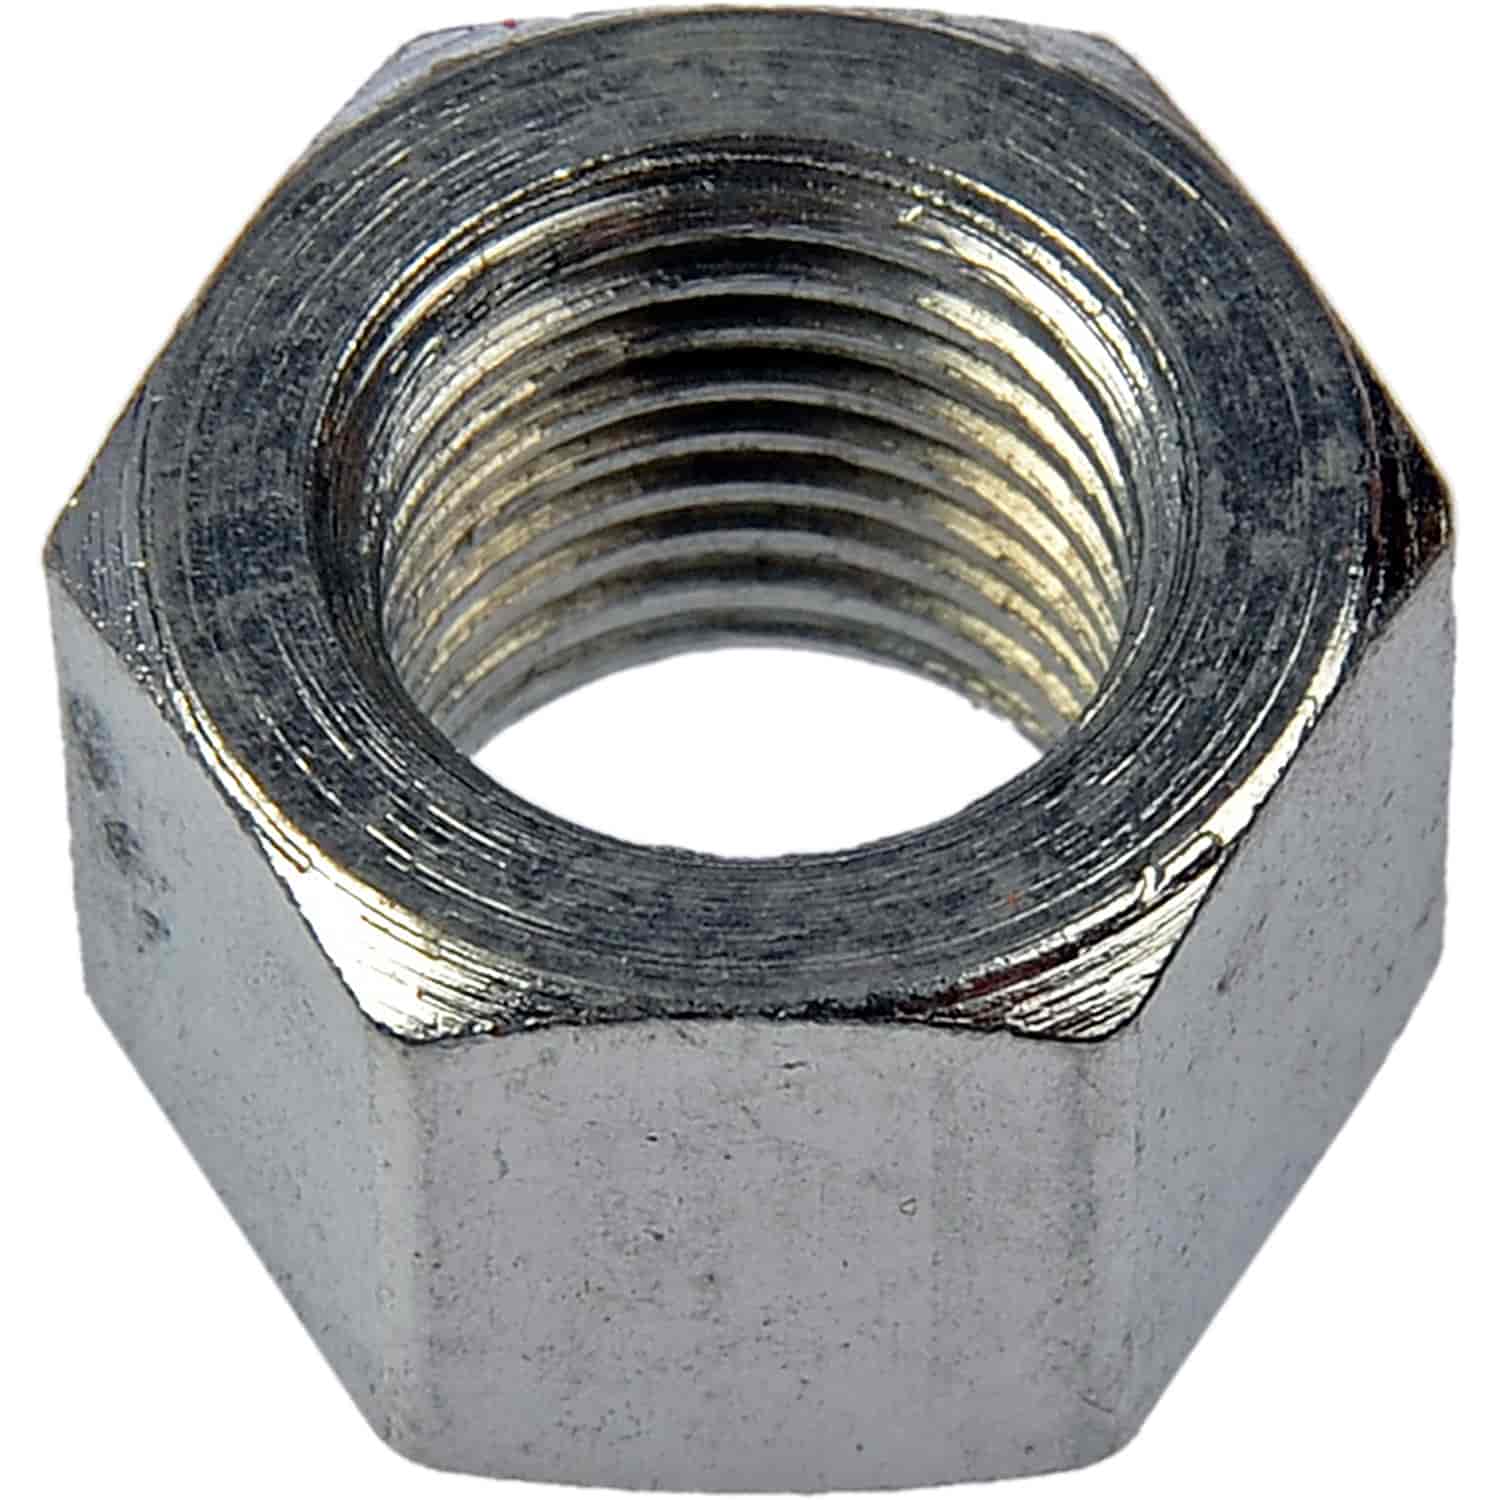 635-002 Connecting Rod Nuts - Type 2 [3/8-24 in. x 9/16 in.]